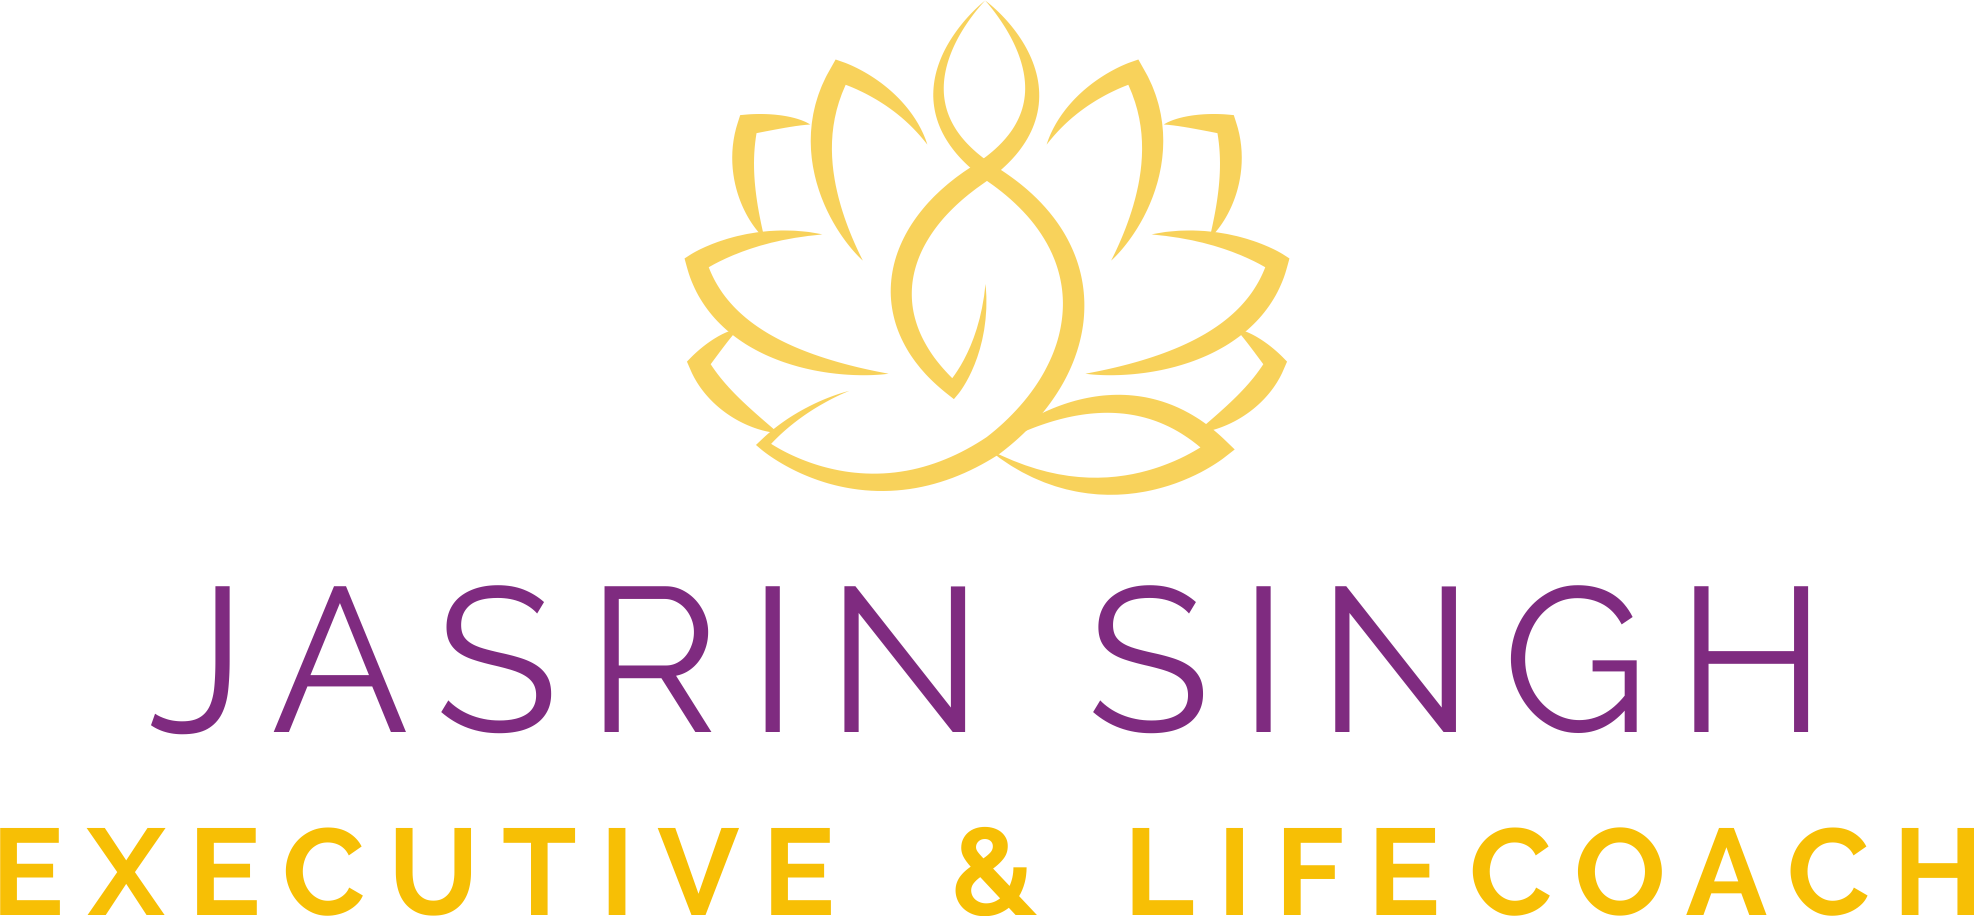 Courses Offered by Jasrin Singh